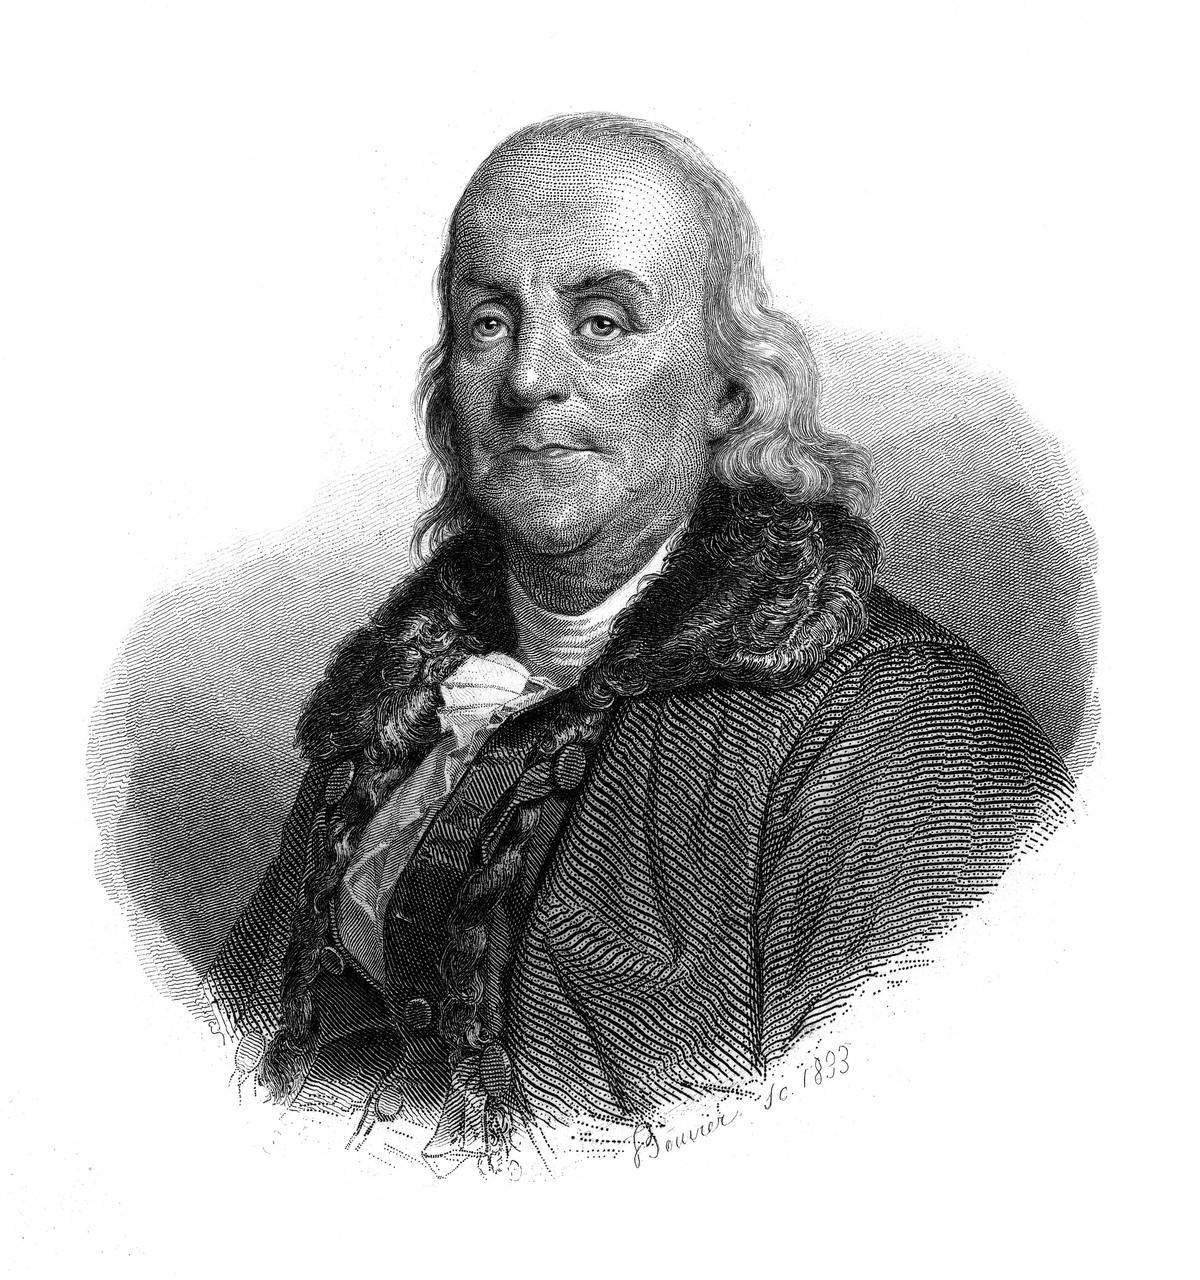 <p>Although Benjamin Franklin never sought to profit from his inventions, he could have made a great deal of money had he patented them. Instead, the prolific inventor felt it was more important to give back and make life easier for others by sharing his creations; in his autobiography he wrote that they should be shared "freely and generously". </p> <p>Unfortunately, because patenting was not part of his plan, Franklin probably lost out on an immense amount of wealth.</p>